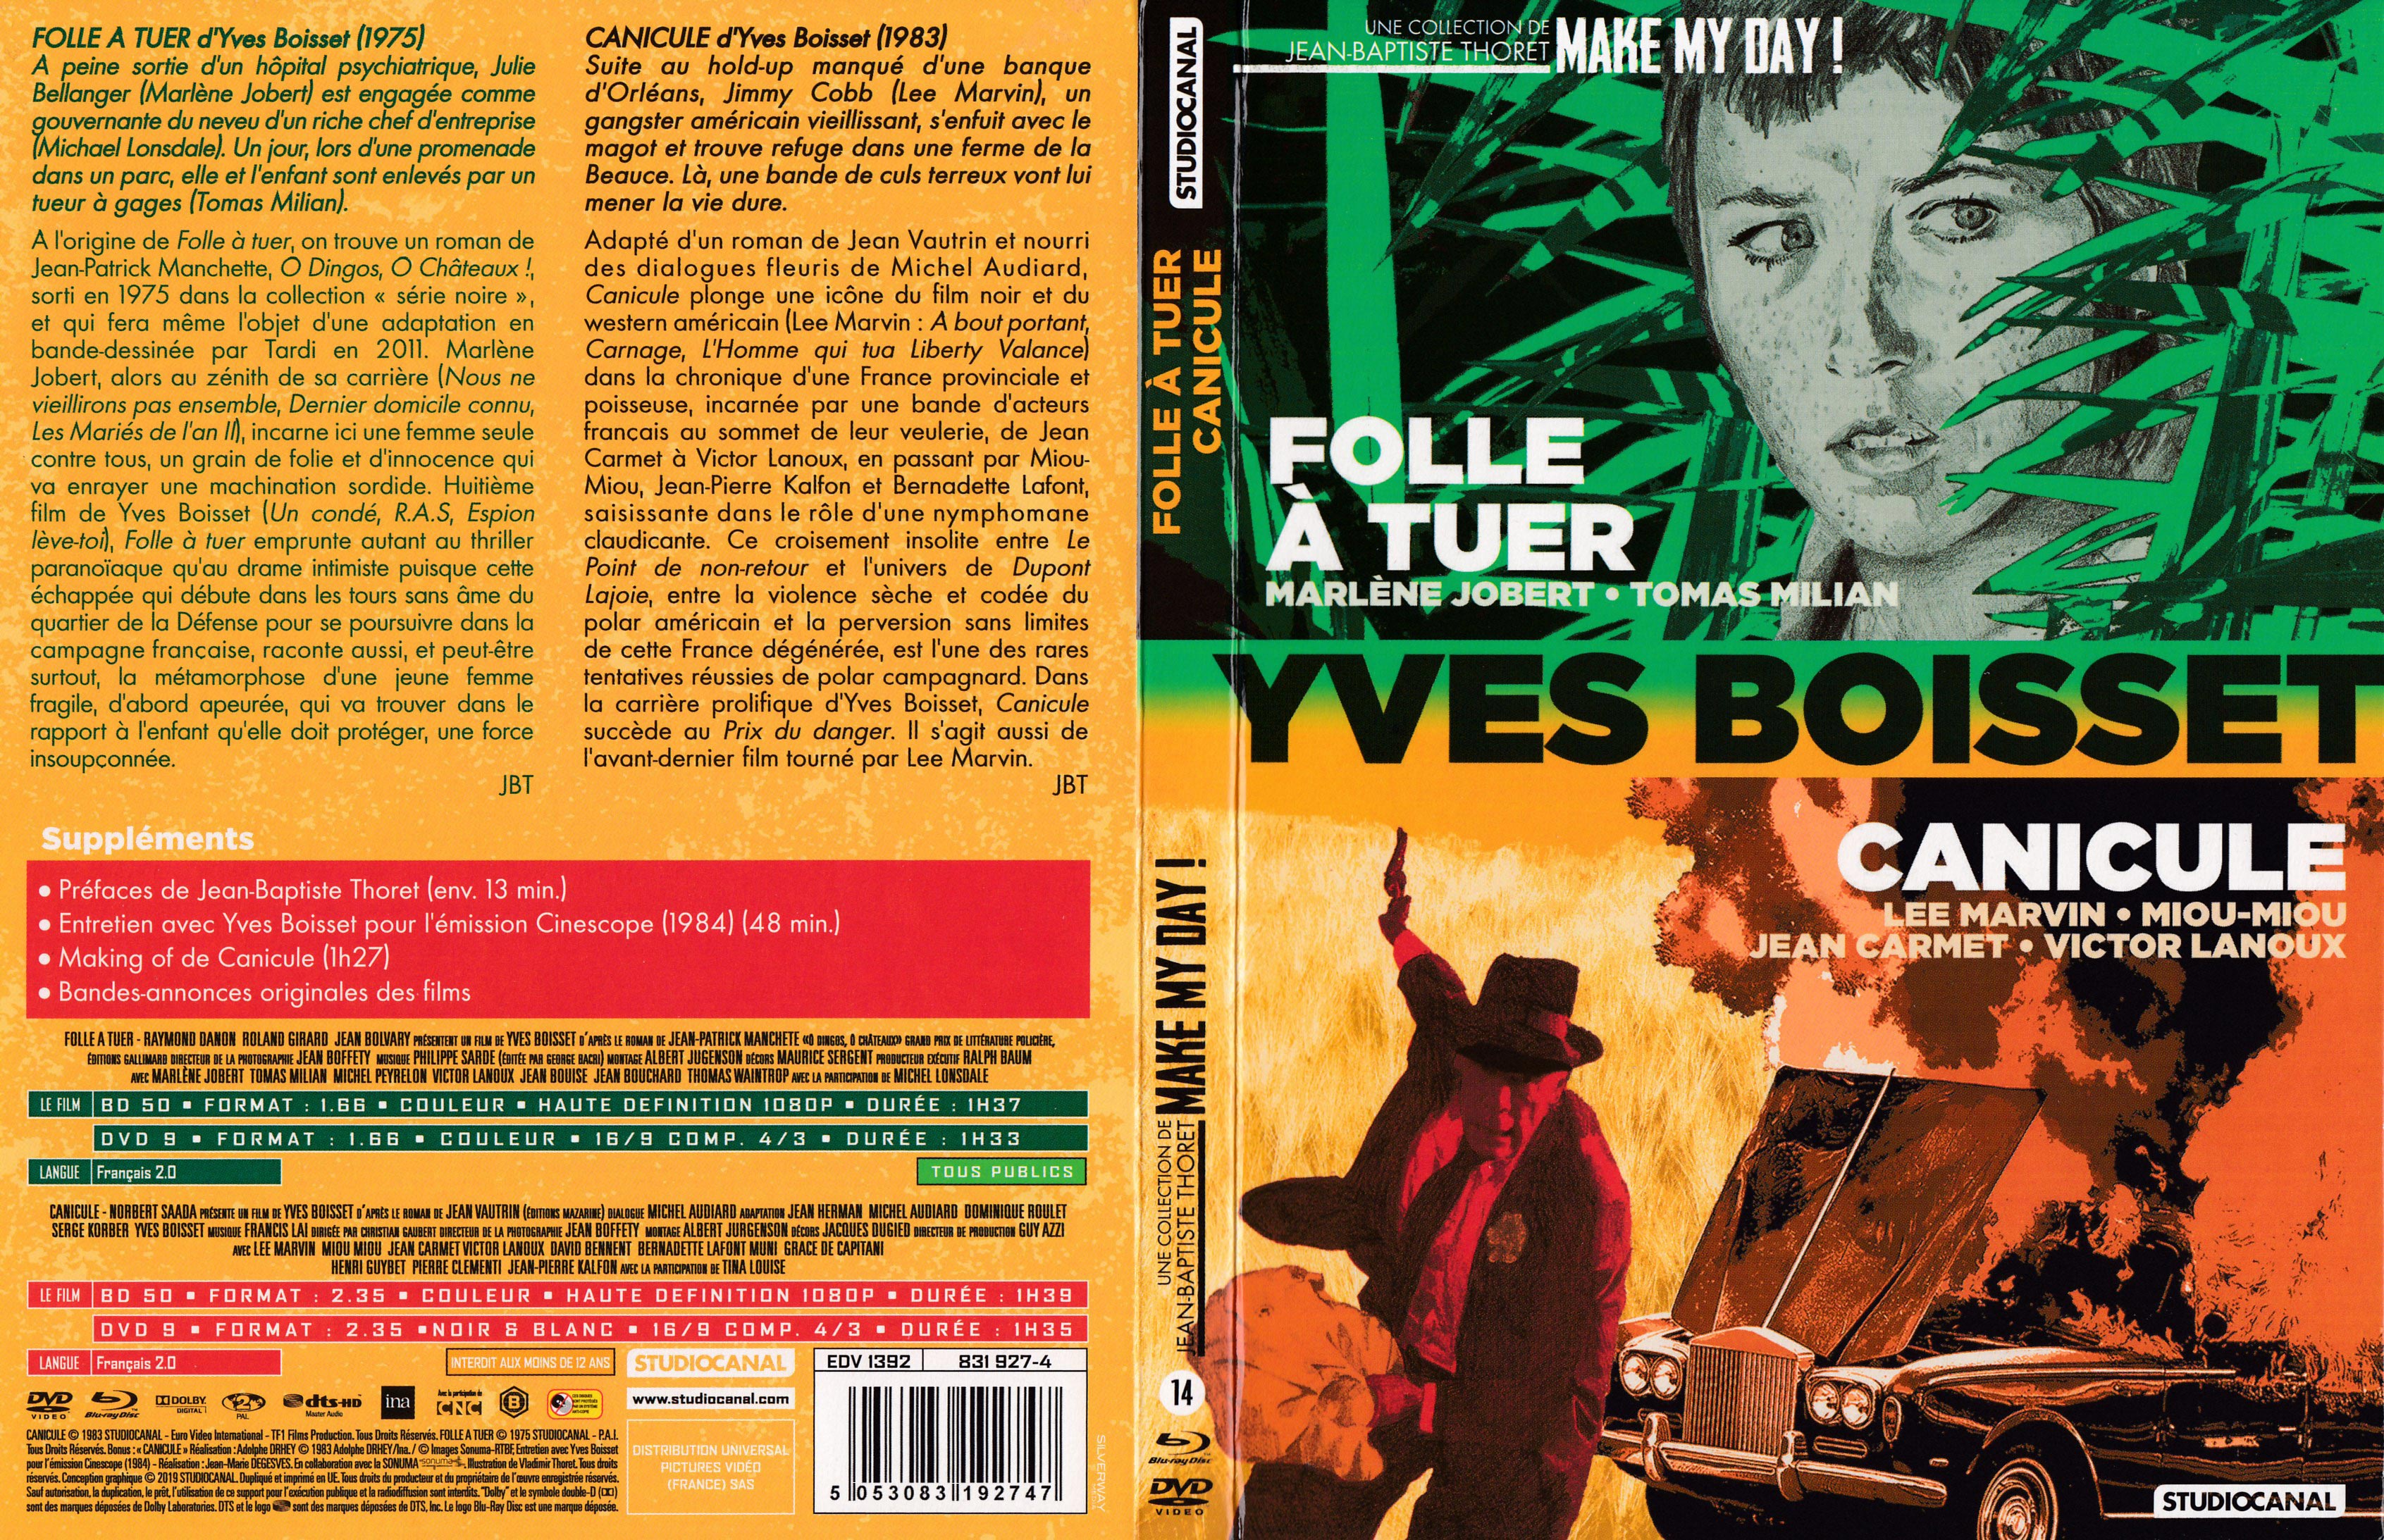 Jaquette DVD Folle a tuer & Canicule (BLU-RAY)